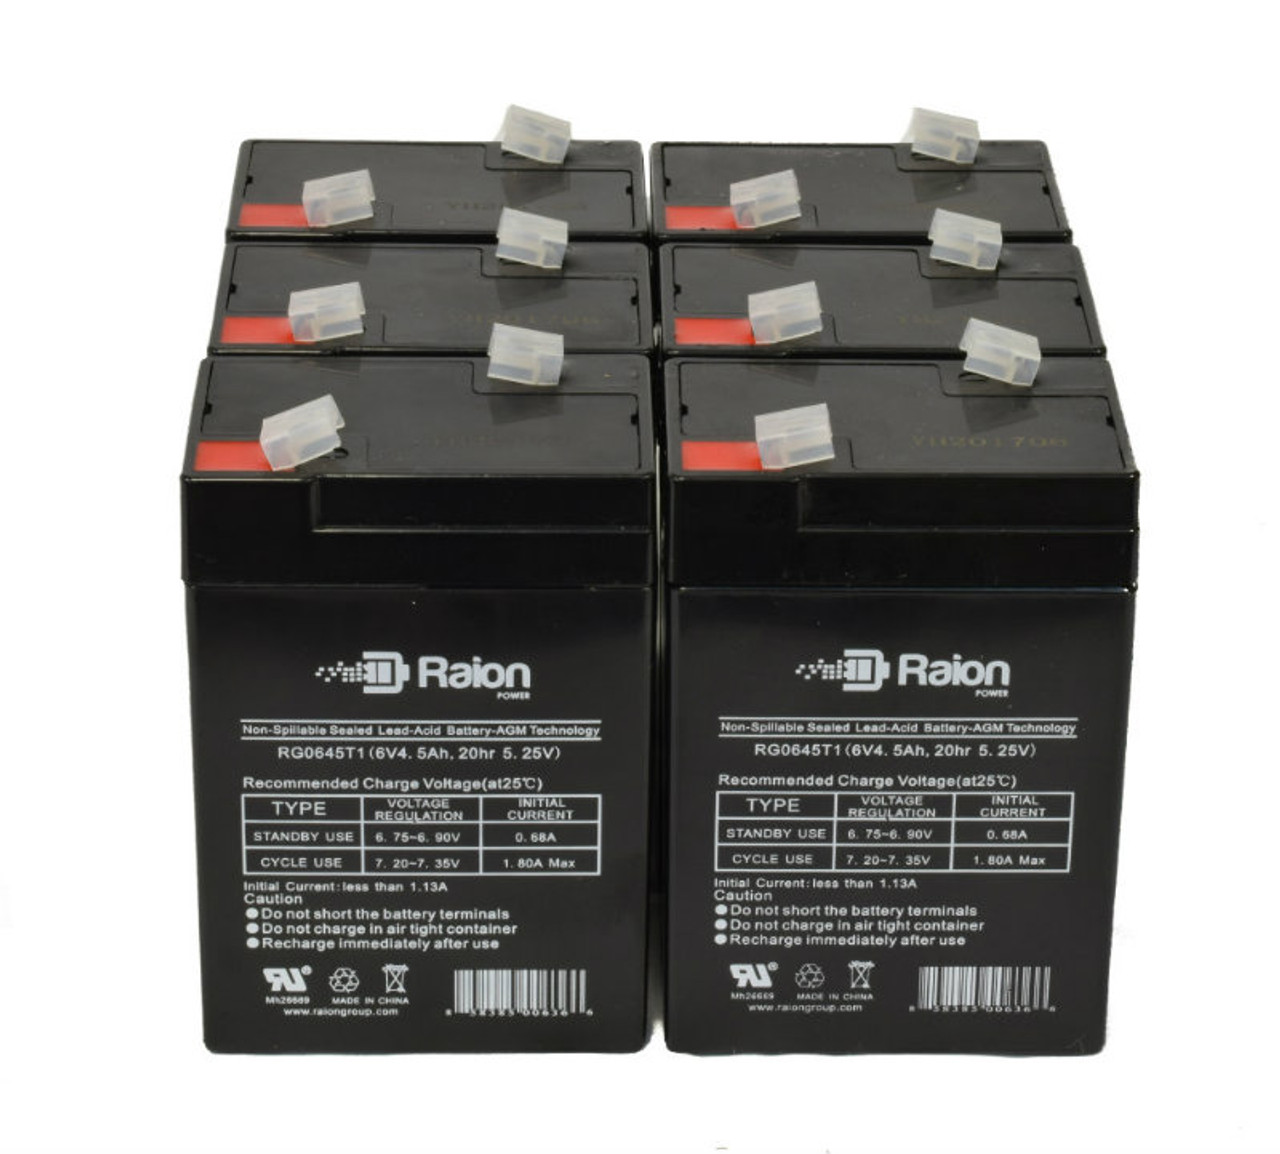 Raion Power RG0645T1 6V 4.5Ah Replacement Medical Equipment Battery for Mcgaw 522 Intelligent Pump - 6 Pack